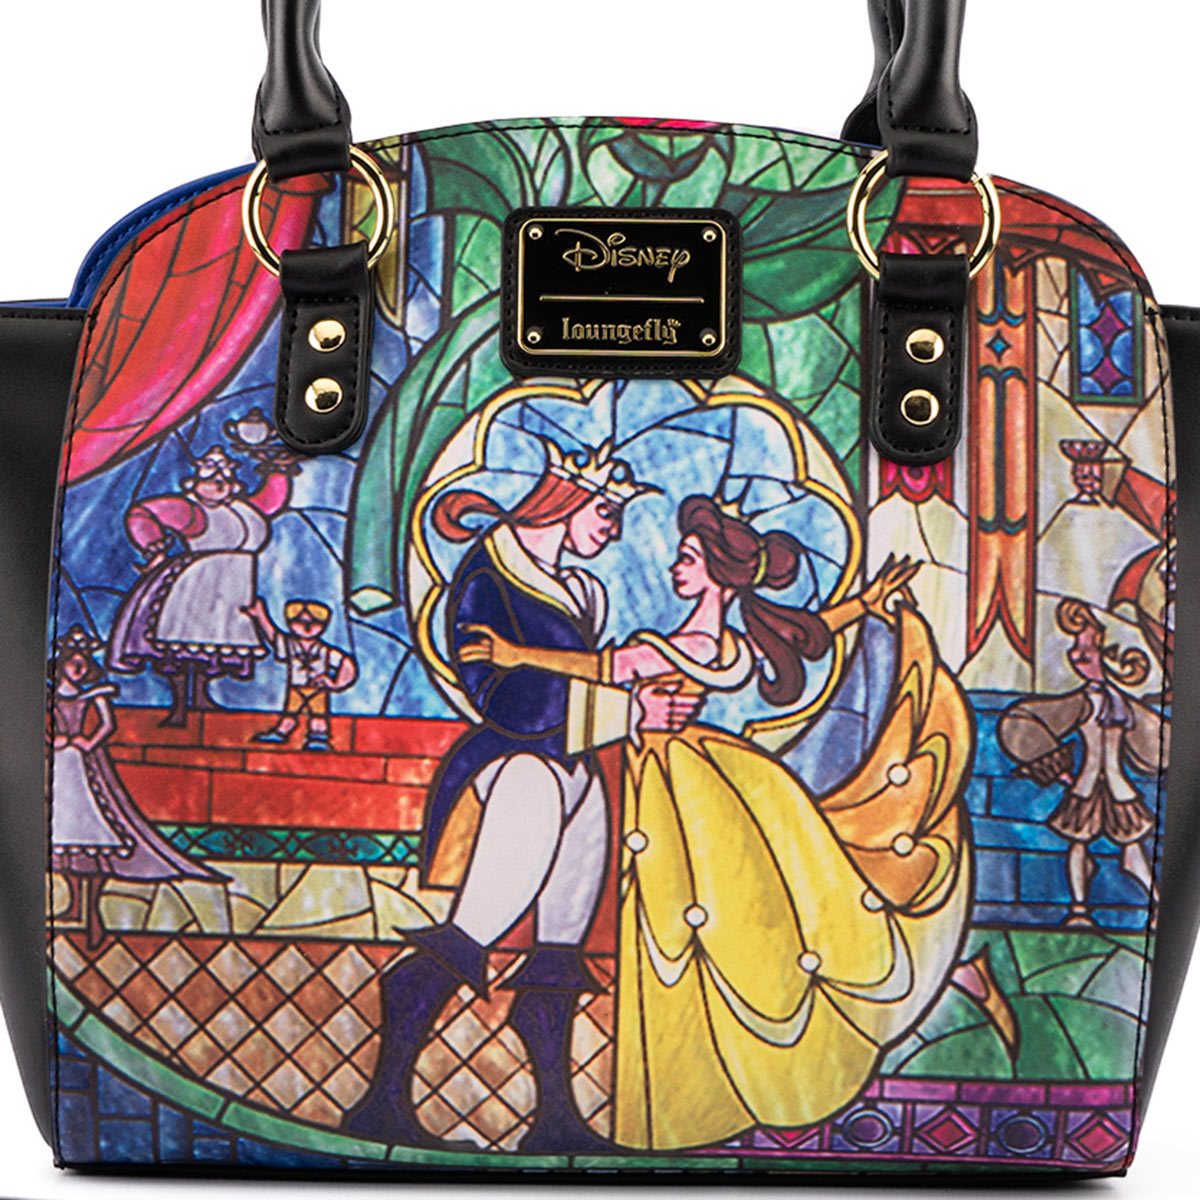 Beauty and the Beast Enchanted Rose Crossbody Bag by Danielle Nicole | Bags,  Rose purse, Disney accessories